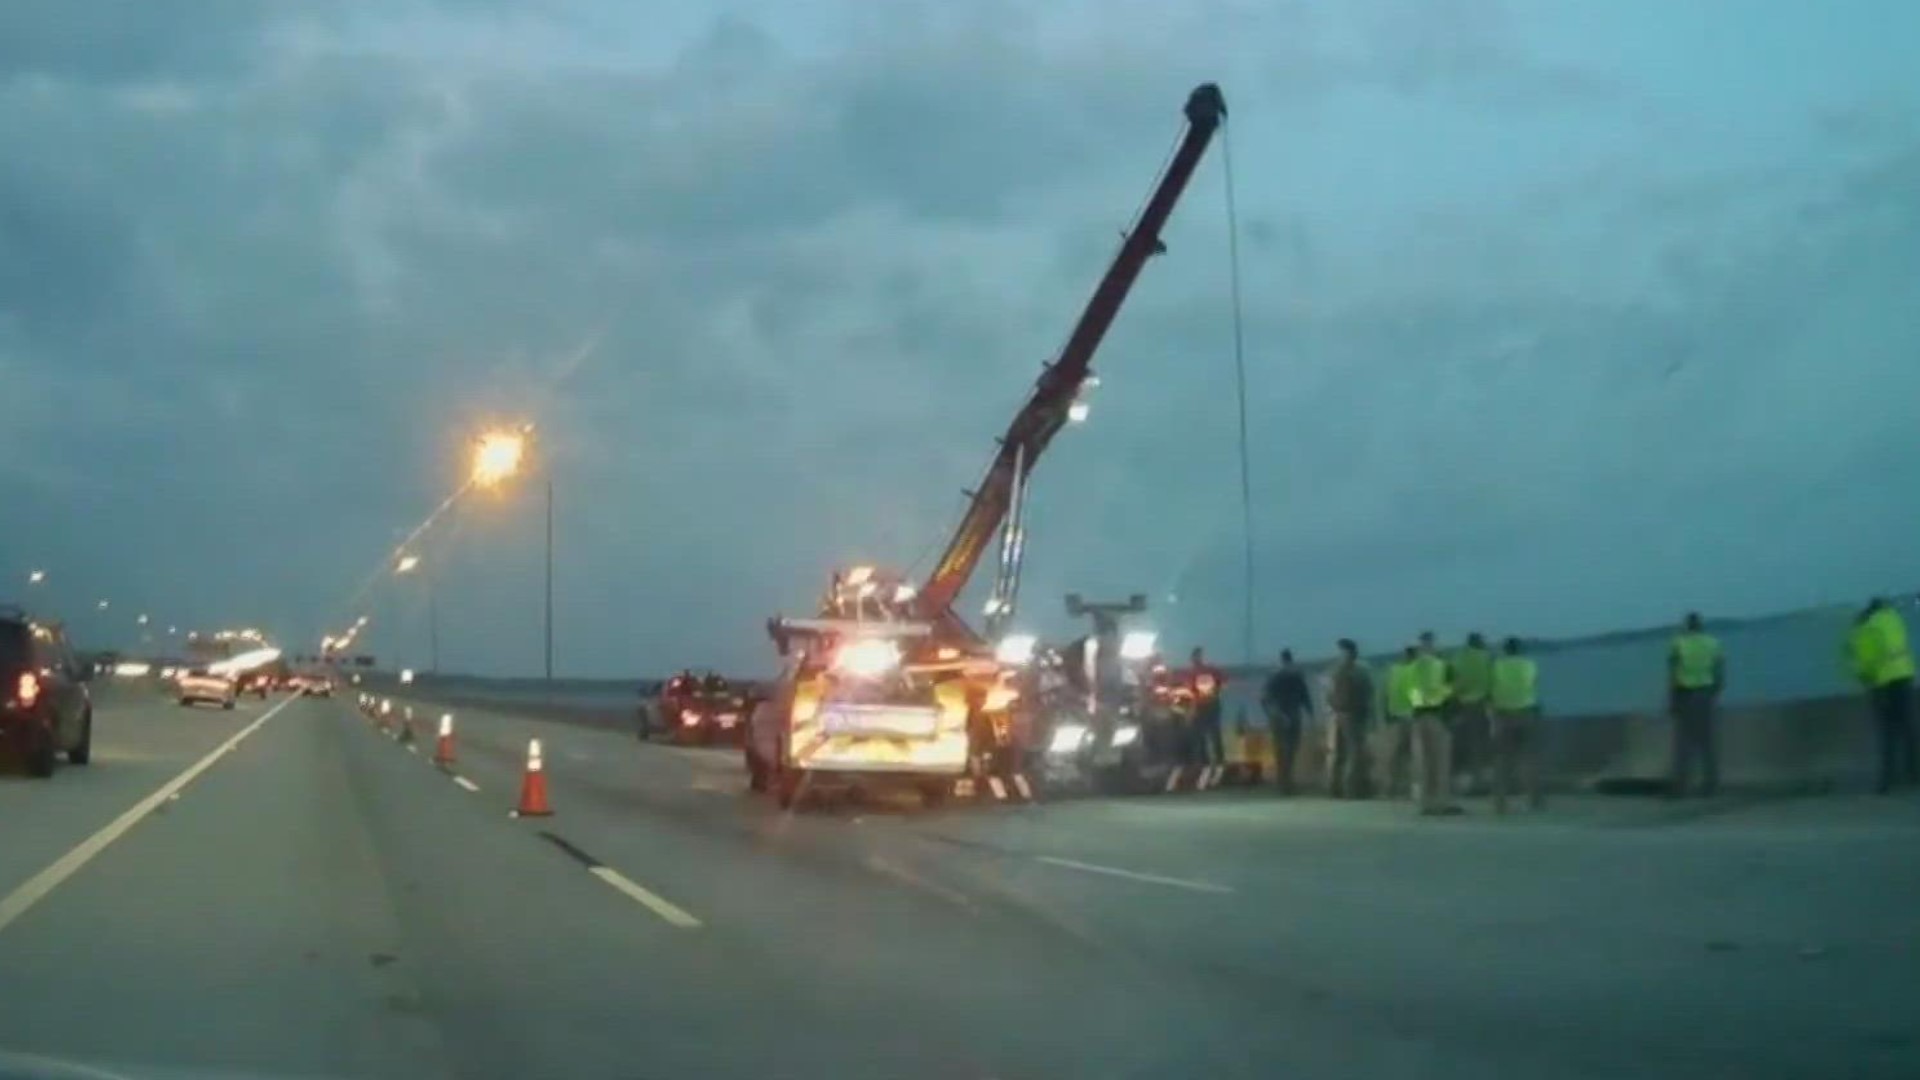 Dive teams are onsite after a car was pushed off the Buckman Bridge, officials say.